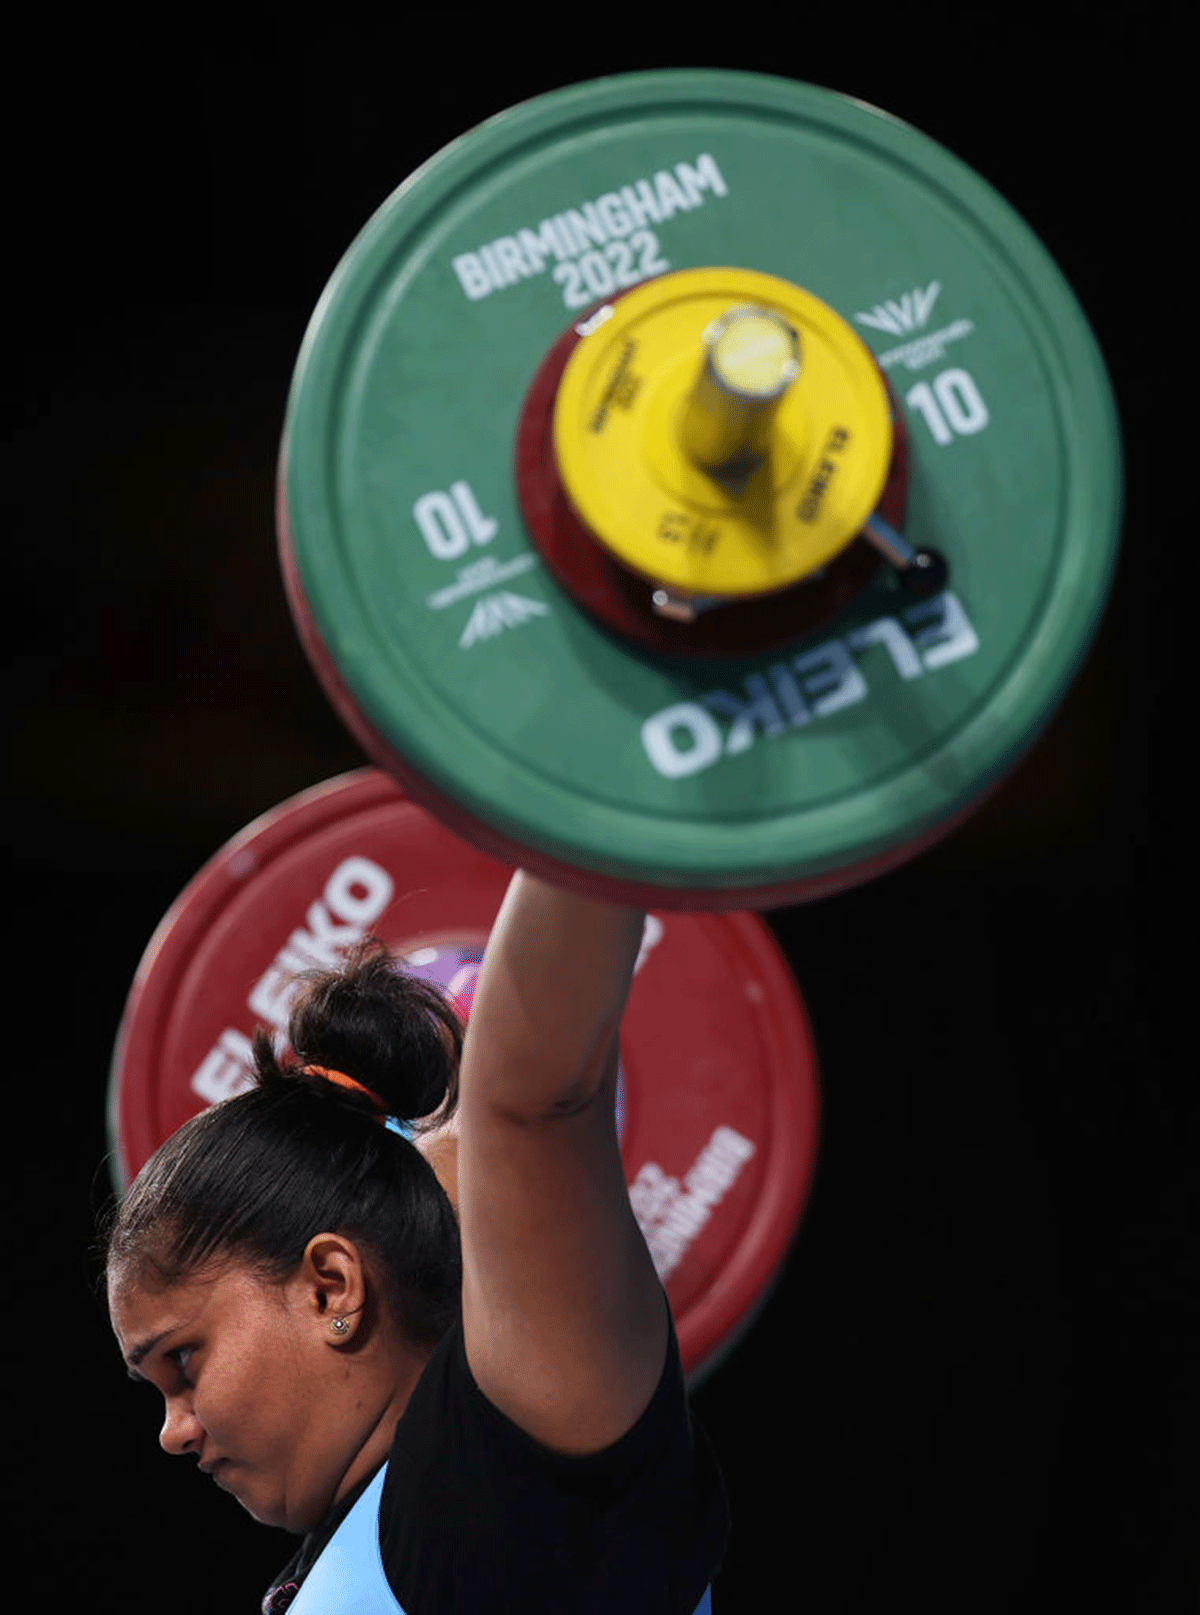 India's Usha Bannur performs a snatch during the Women's Weightlifting 87kg Final on day five of the Birmingham 2022 Commonwealth Games at NEC Arena in Birmingham on Tuesday.